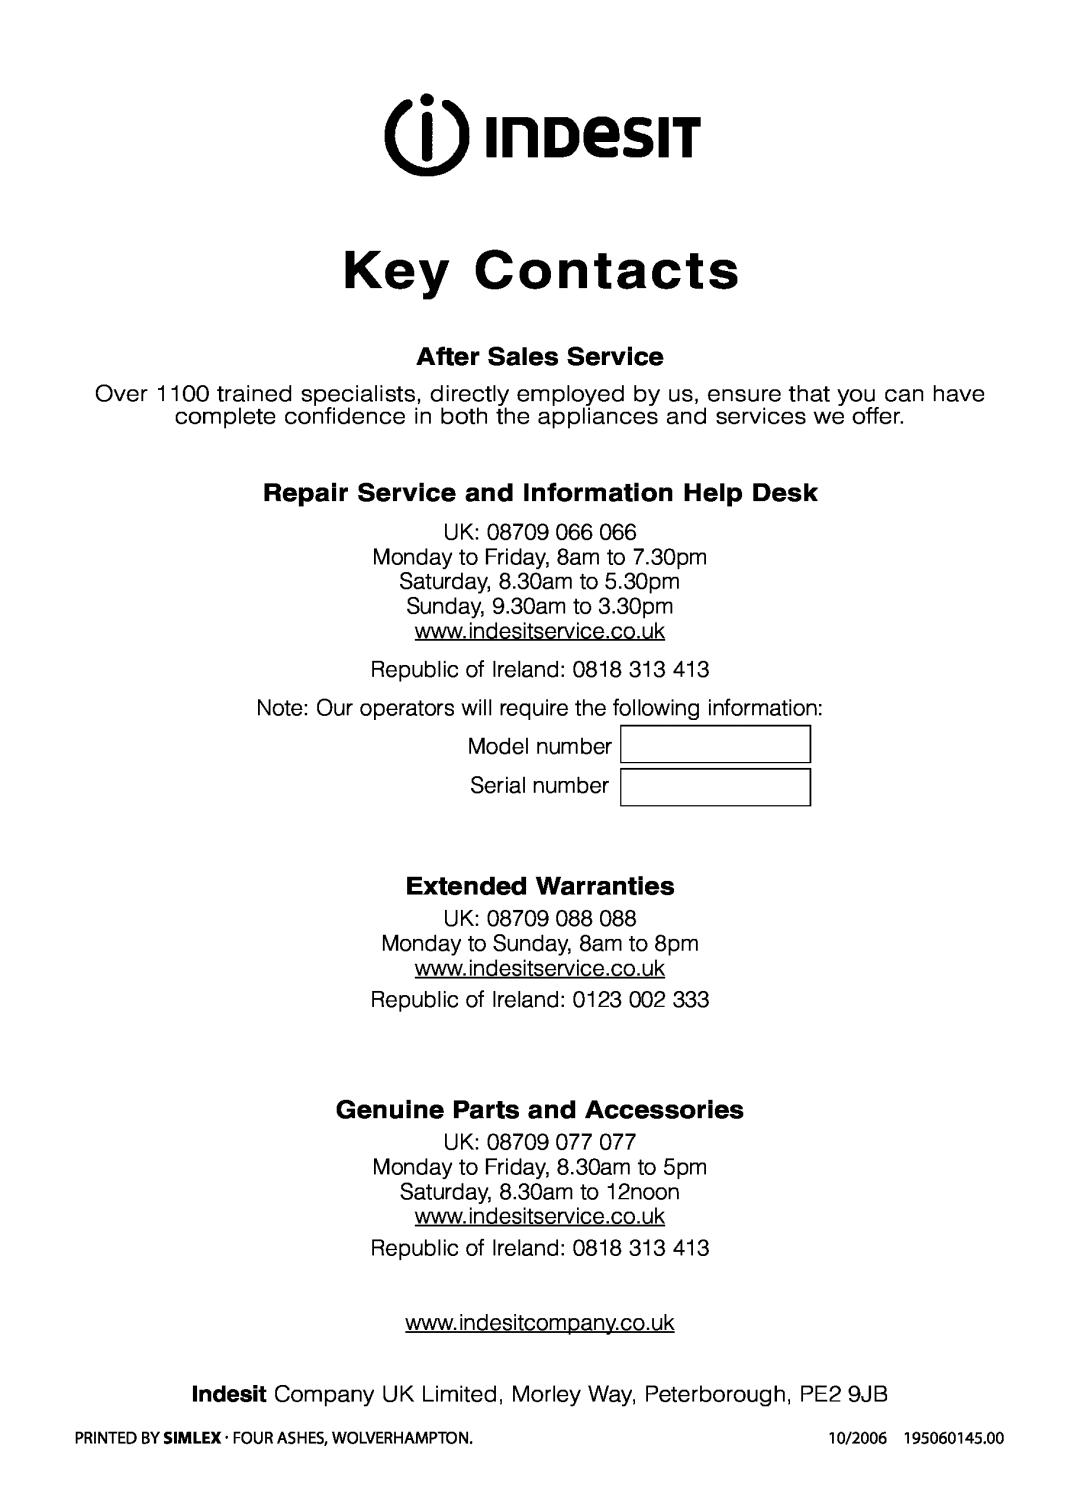 Indesit KT6G2WIR manual Key Contacts, After Sales Service, Repair Service and Information Help Desk, Extended Warranties 